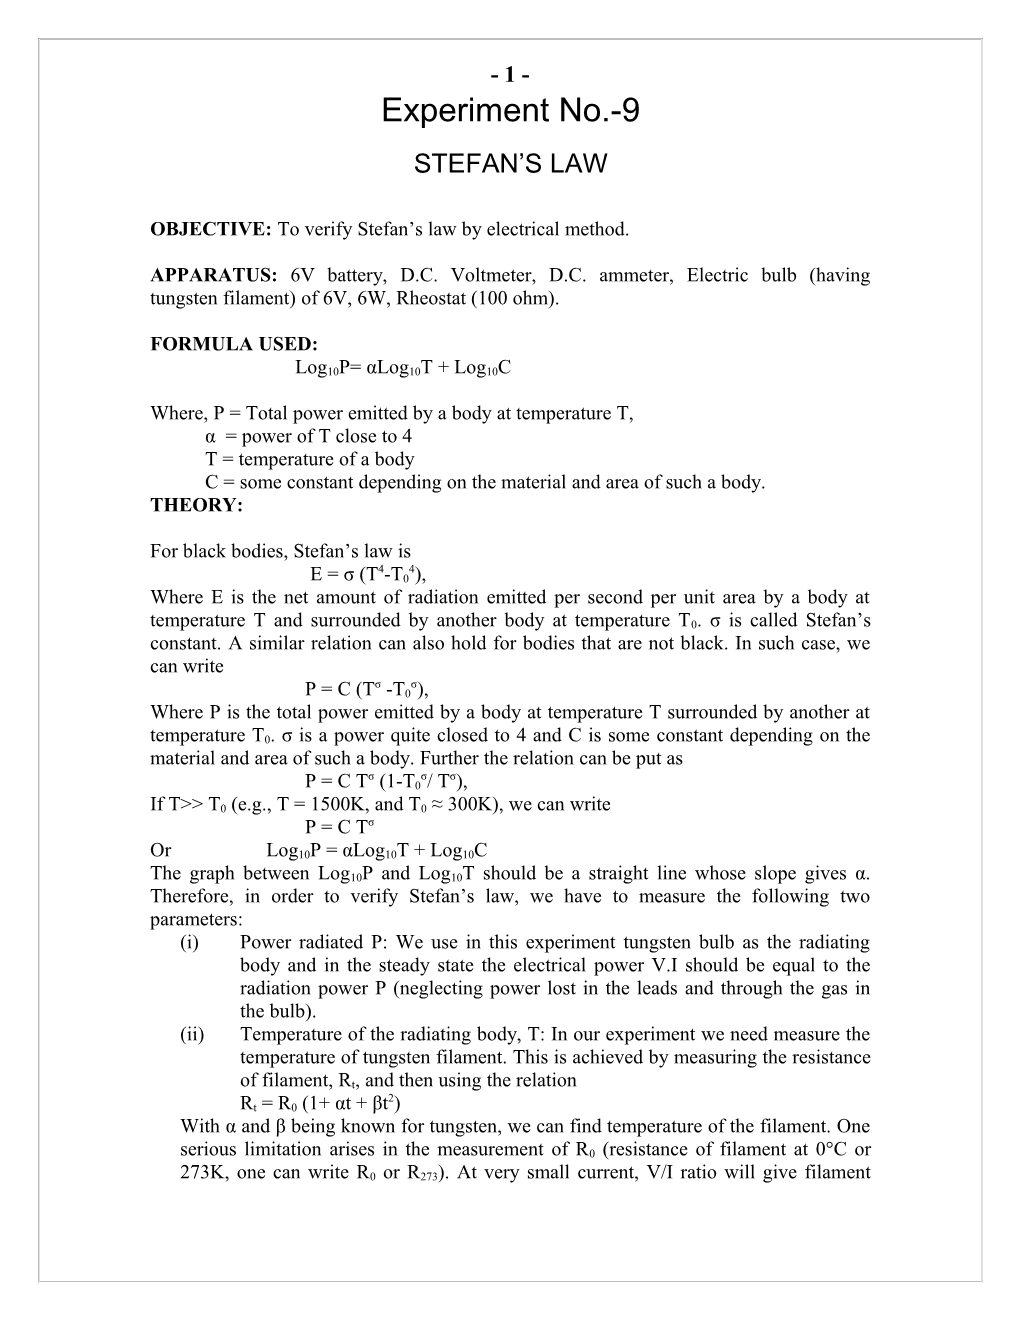 OBJECTIVE: to Verify Stefan S Law by Electrical Method